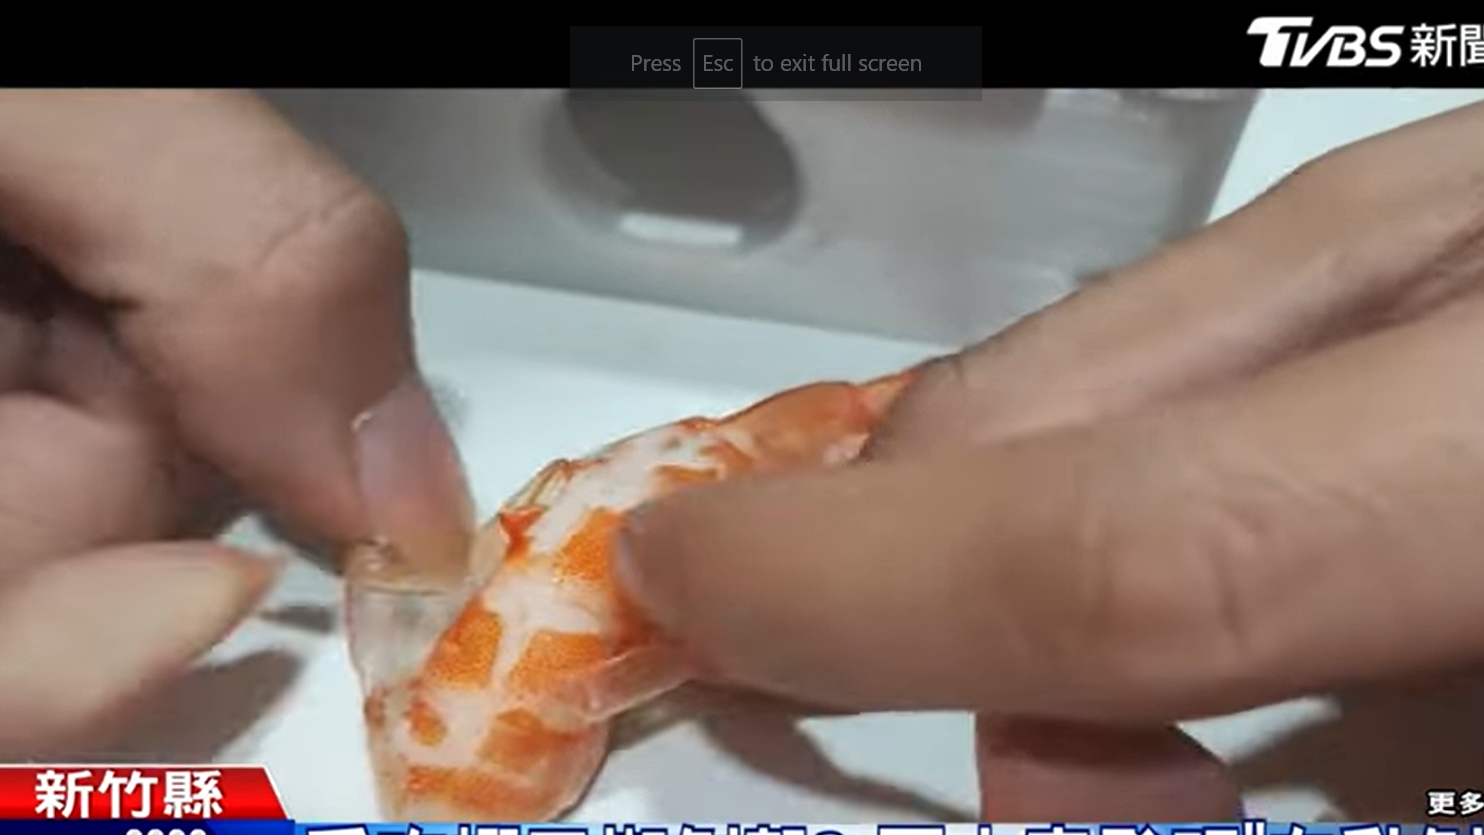 Primary school students in taiwan invent device that removes prawn shells & innards so you don't have to | weirdkaya